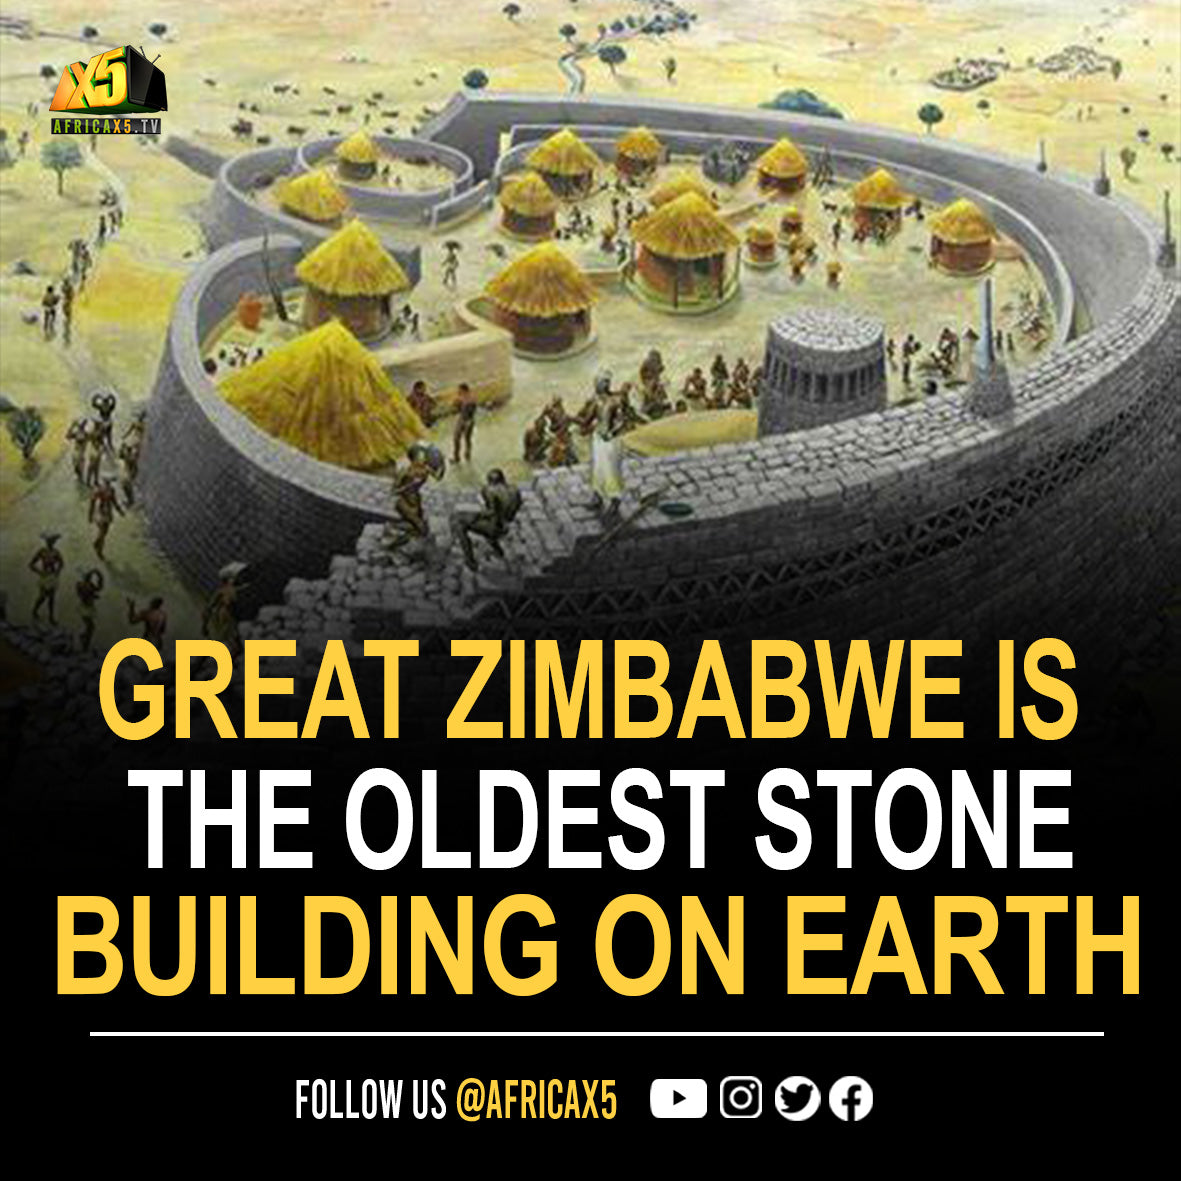 Great Zimbabwe is the oldest stone building on Earth